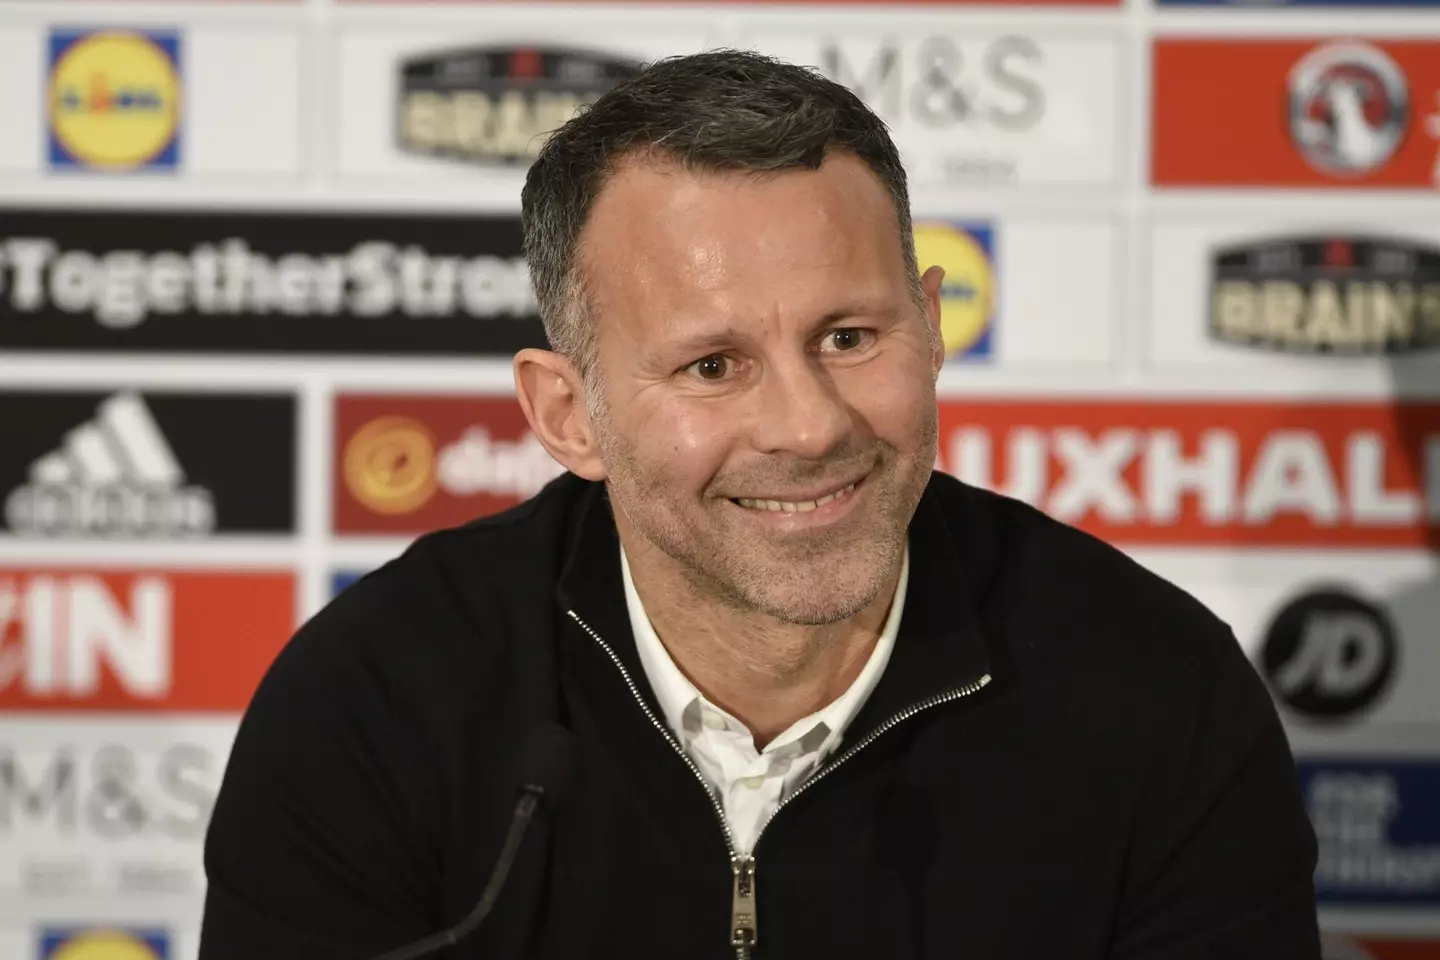 Giggs denied all the charges against him.